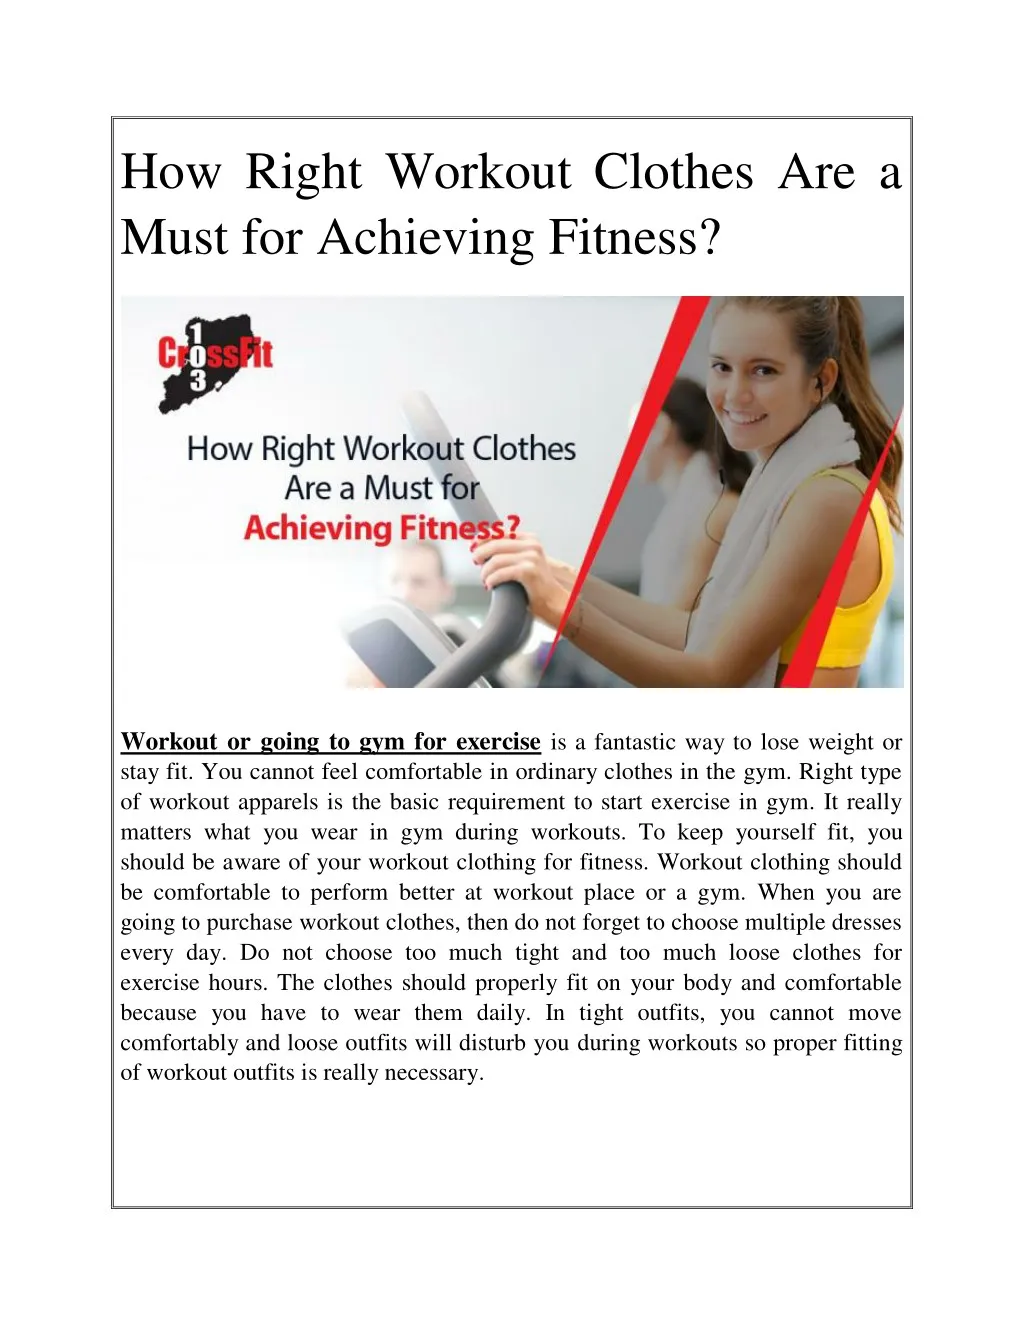 how right workout clothes are a must